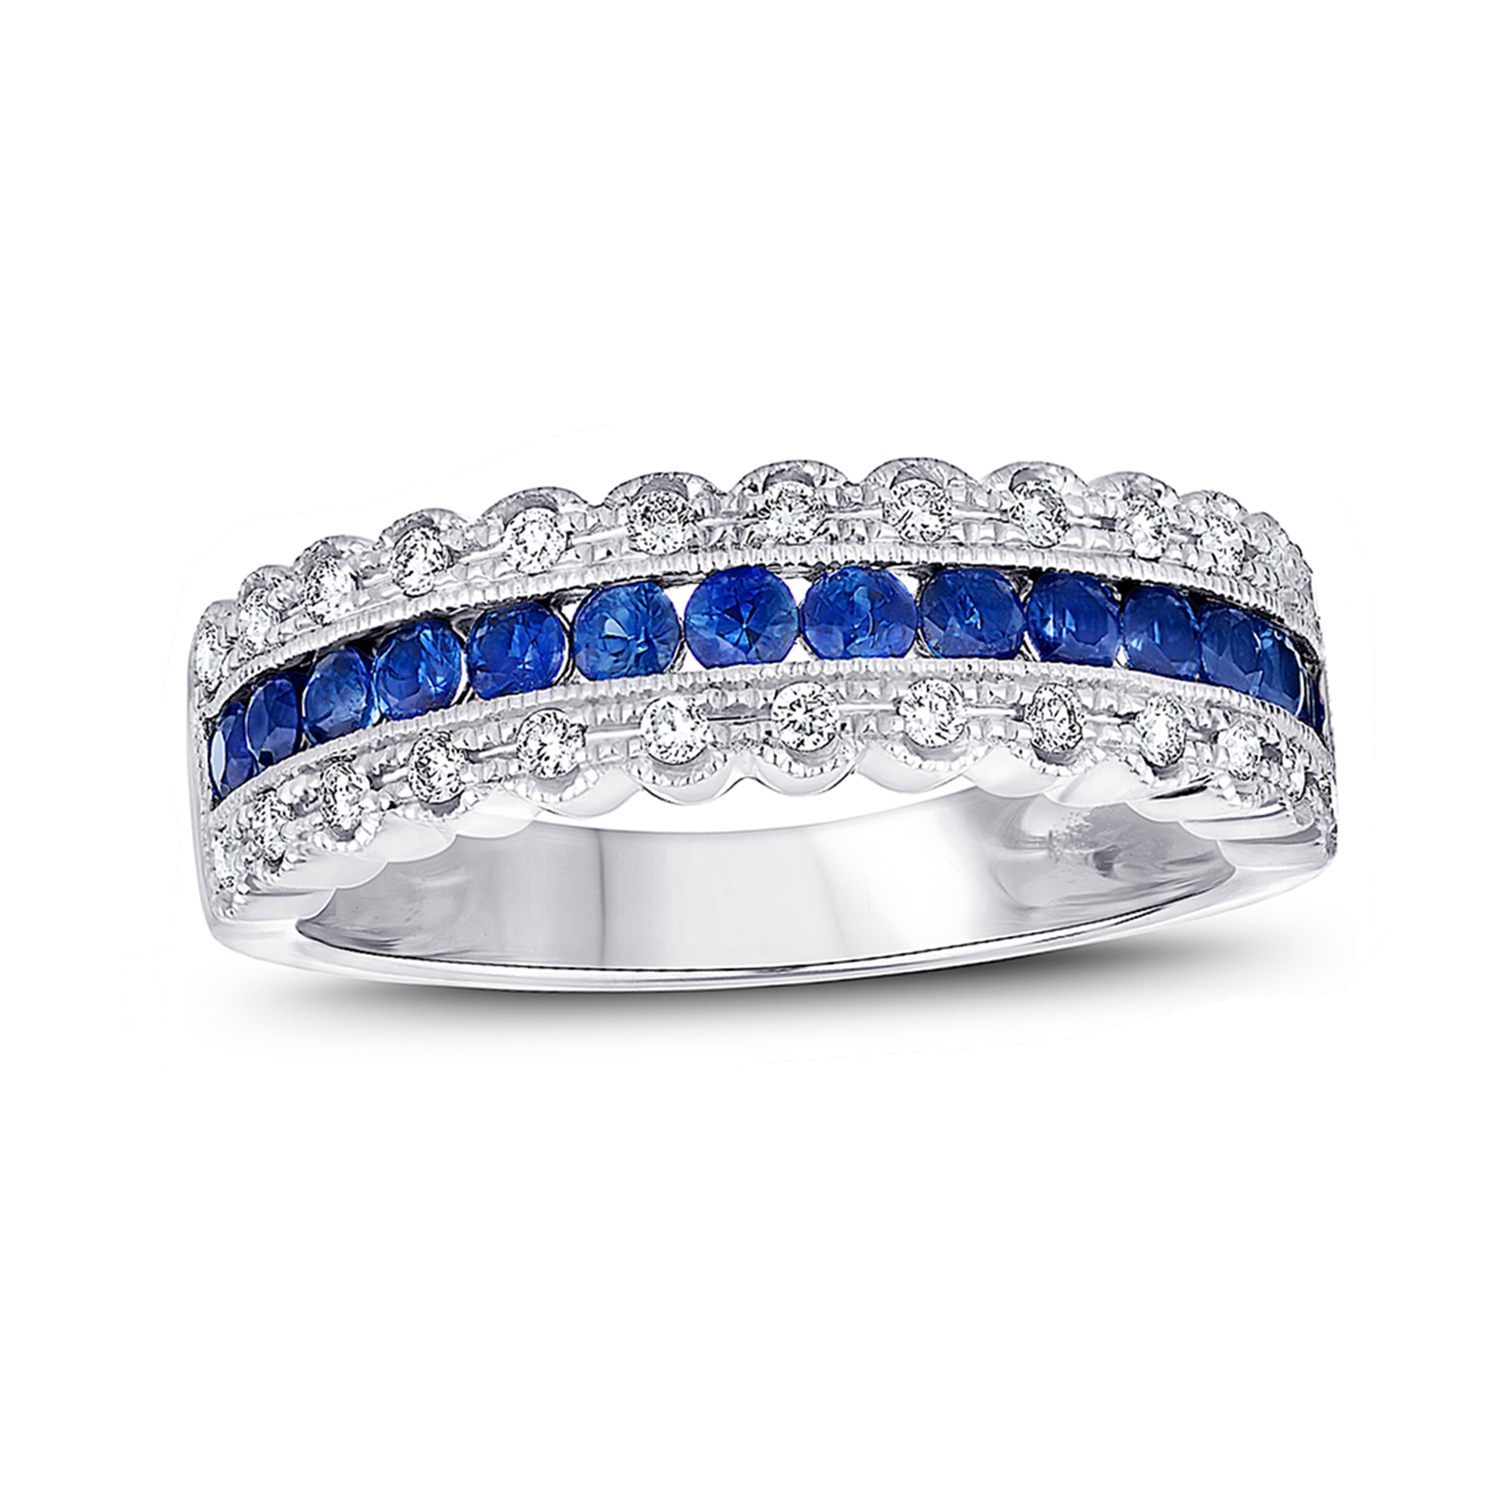 View 0.87cttw Diamond and Sapphire Wedding Band in 14k White Gold